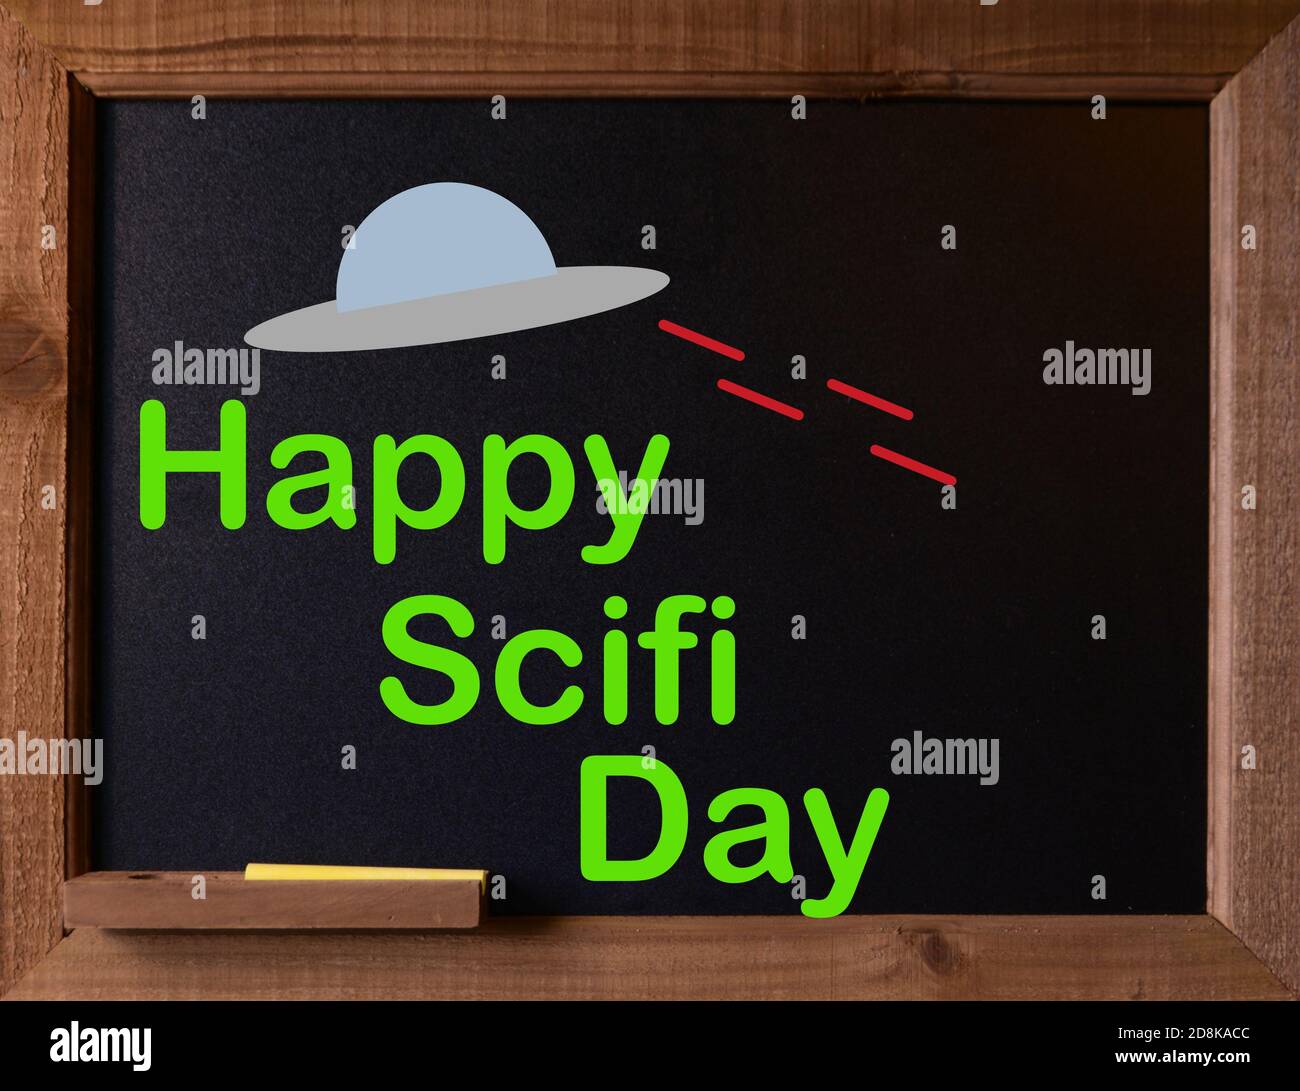 Blackboard with graphic and message for National Holiday, happy Scifi day Stock Photo